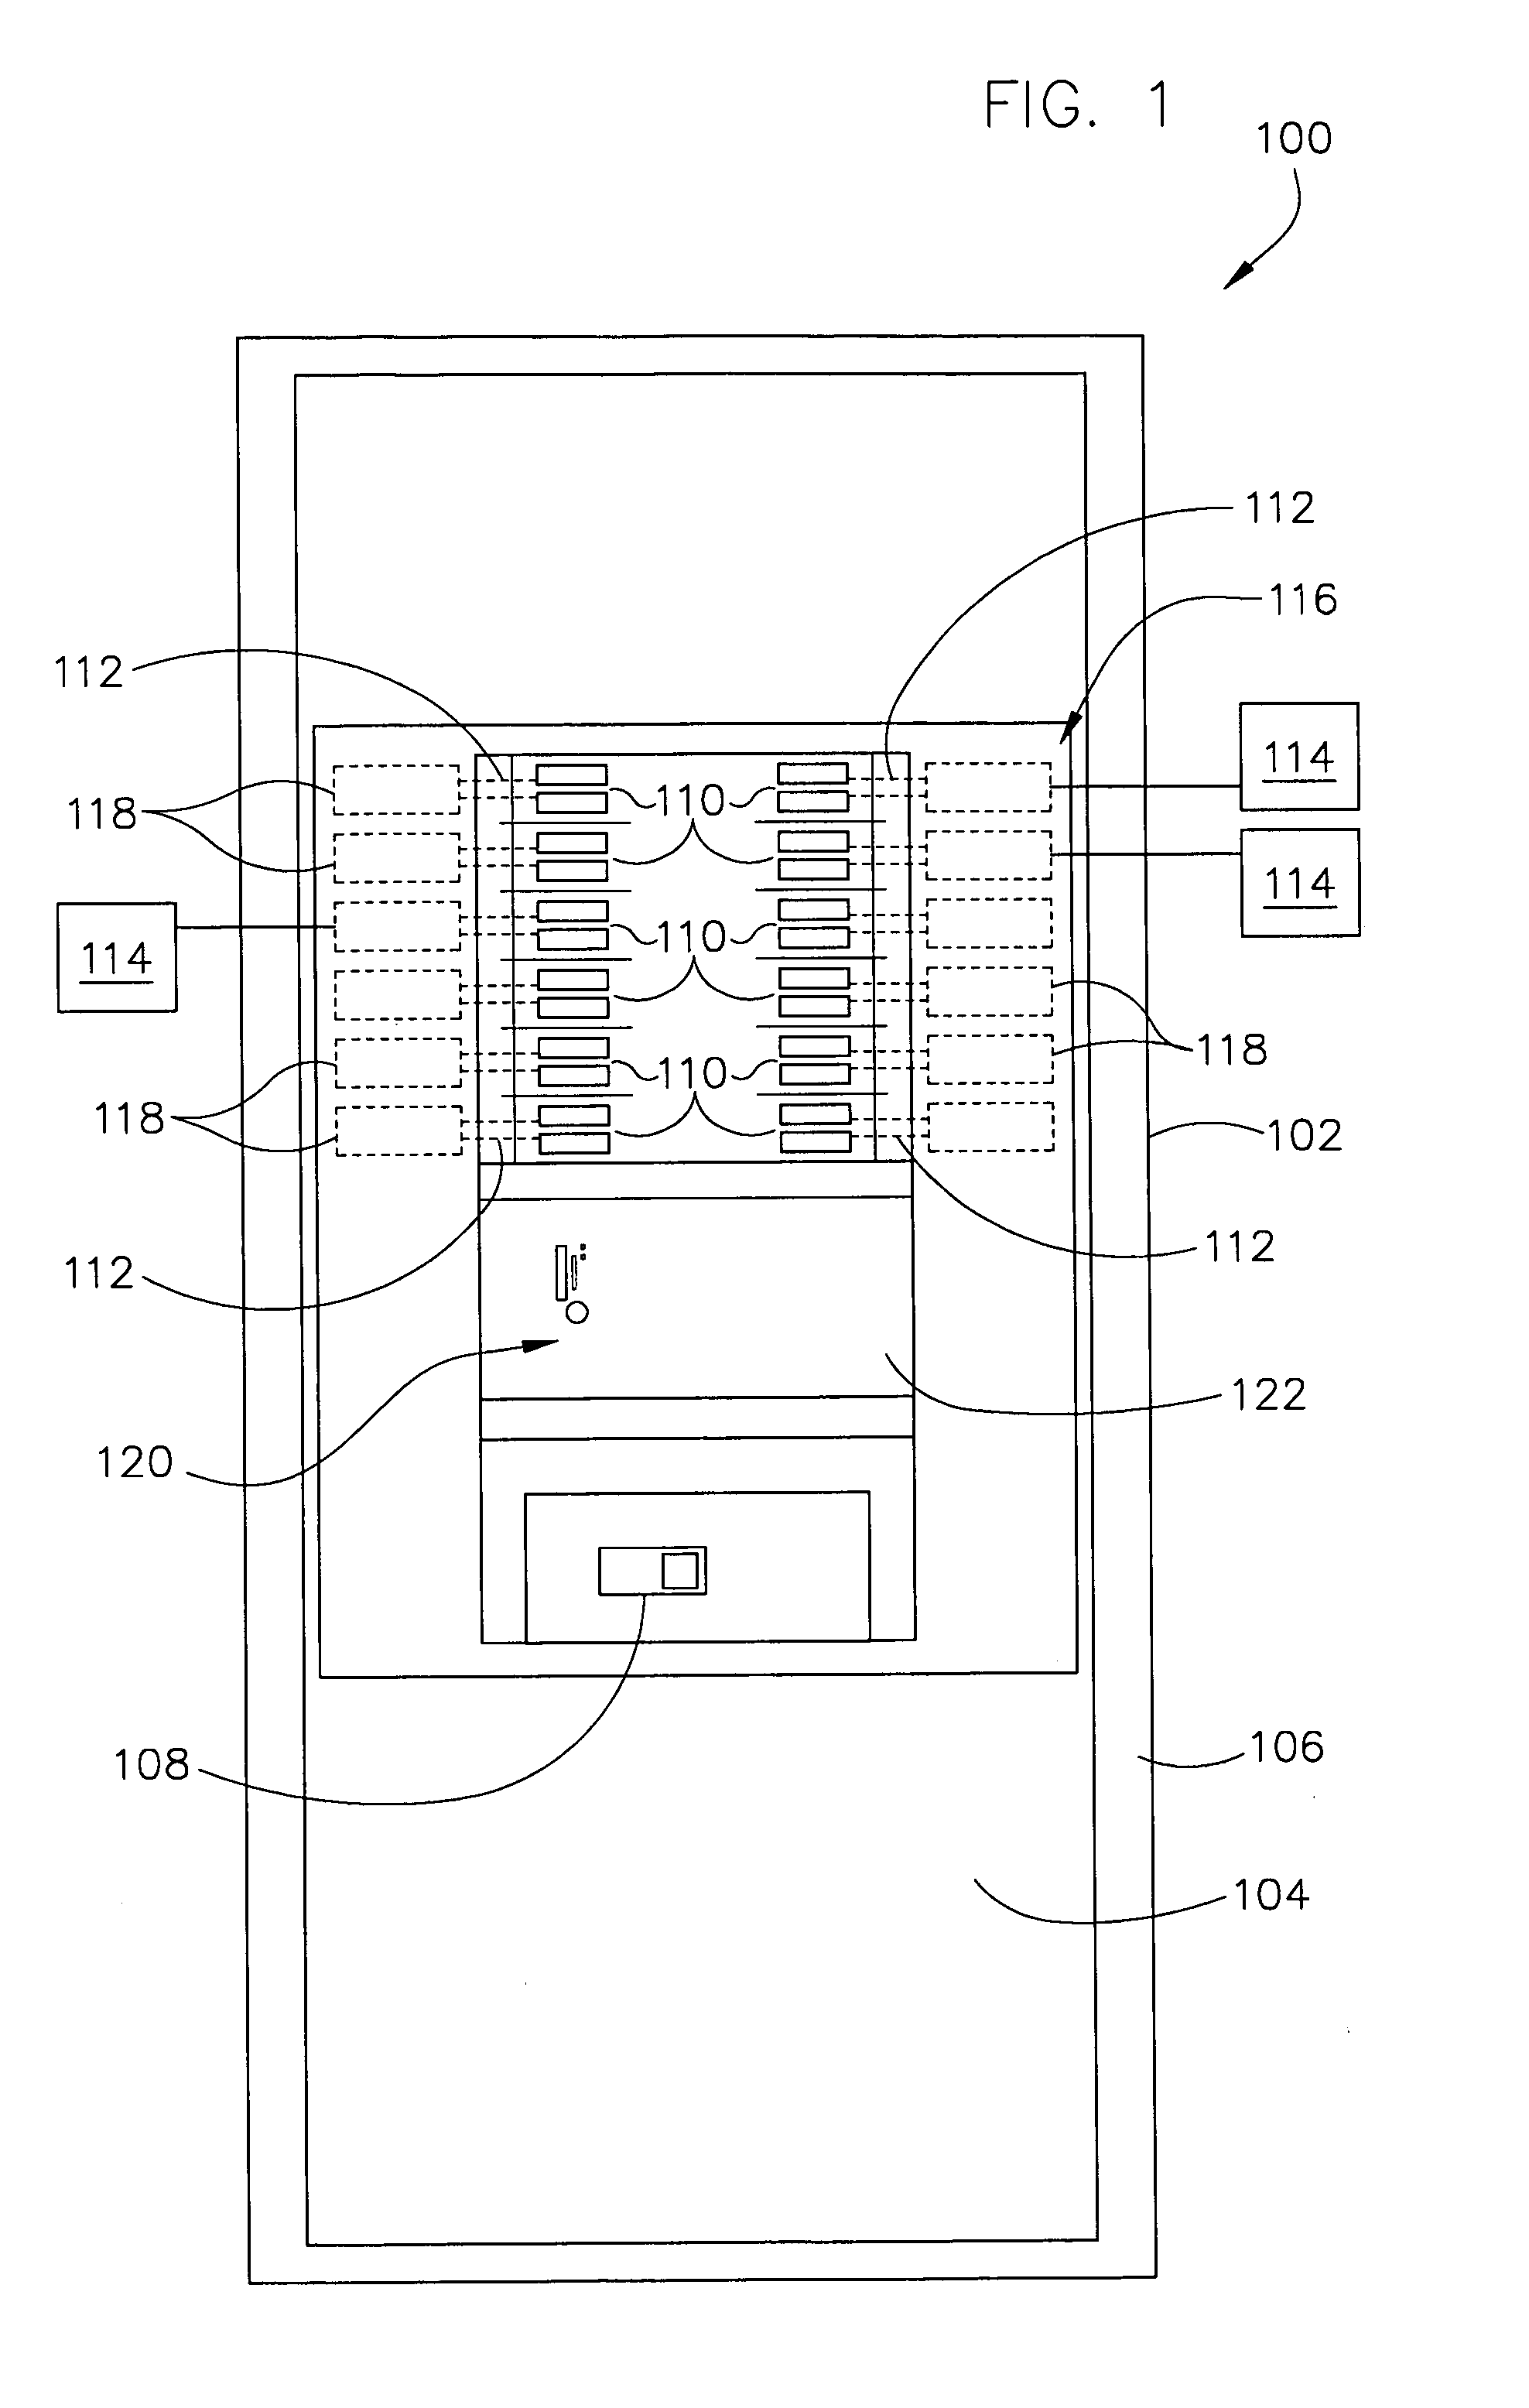 Methods and systems for electrical power sub-metering